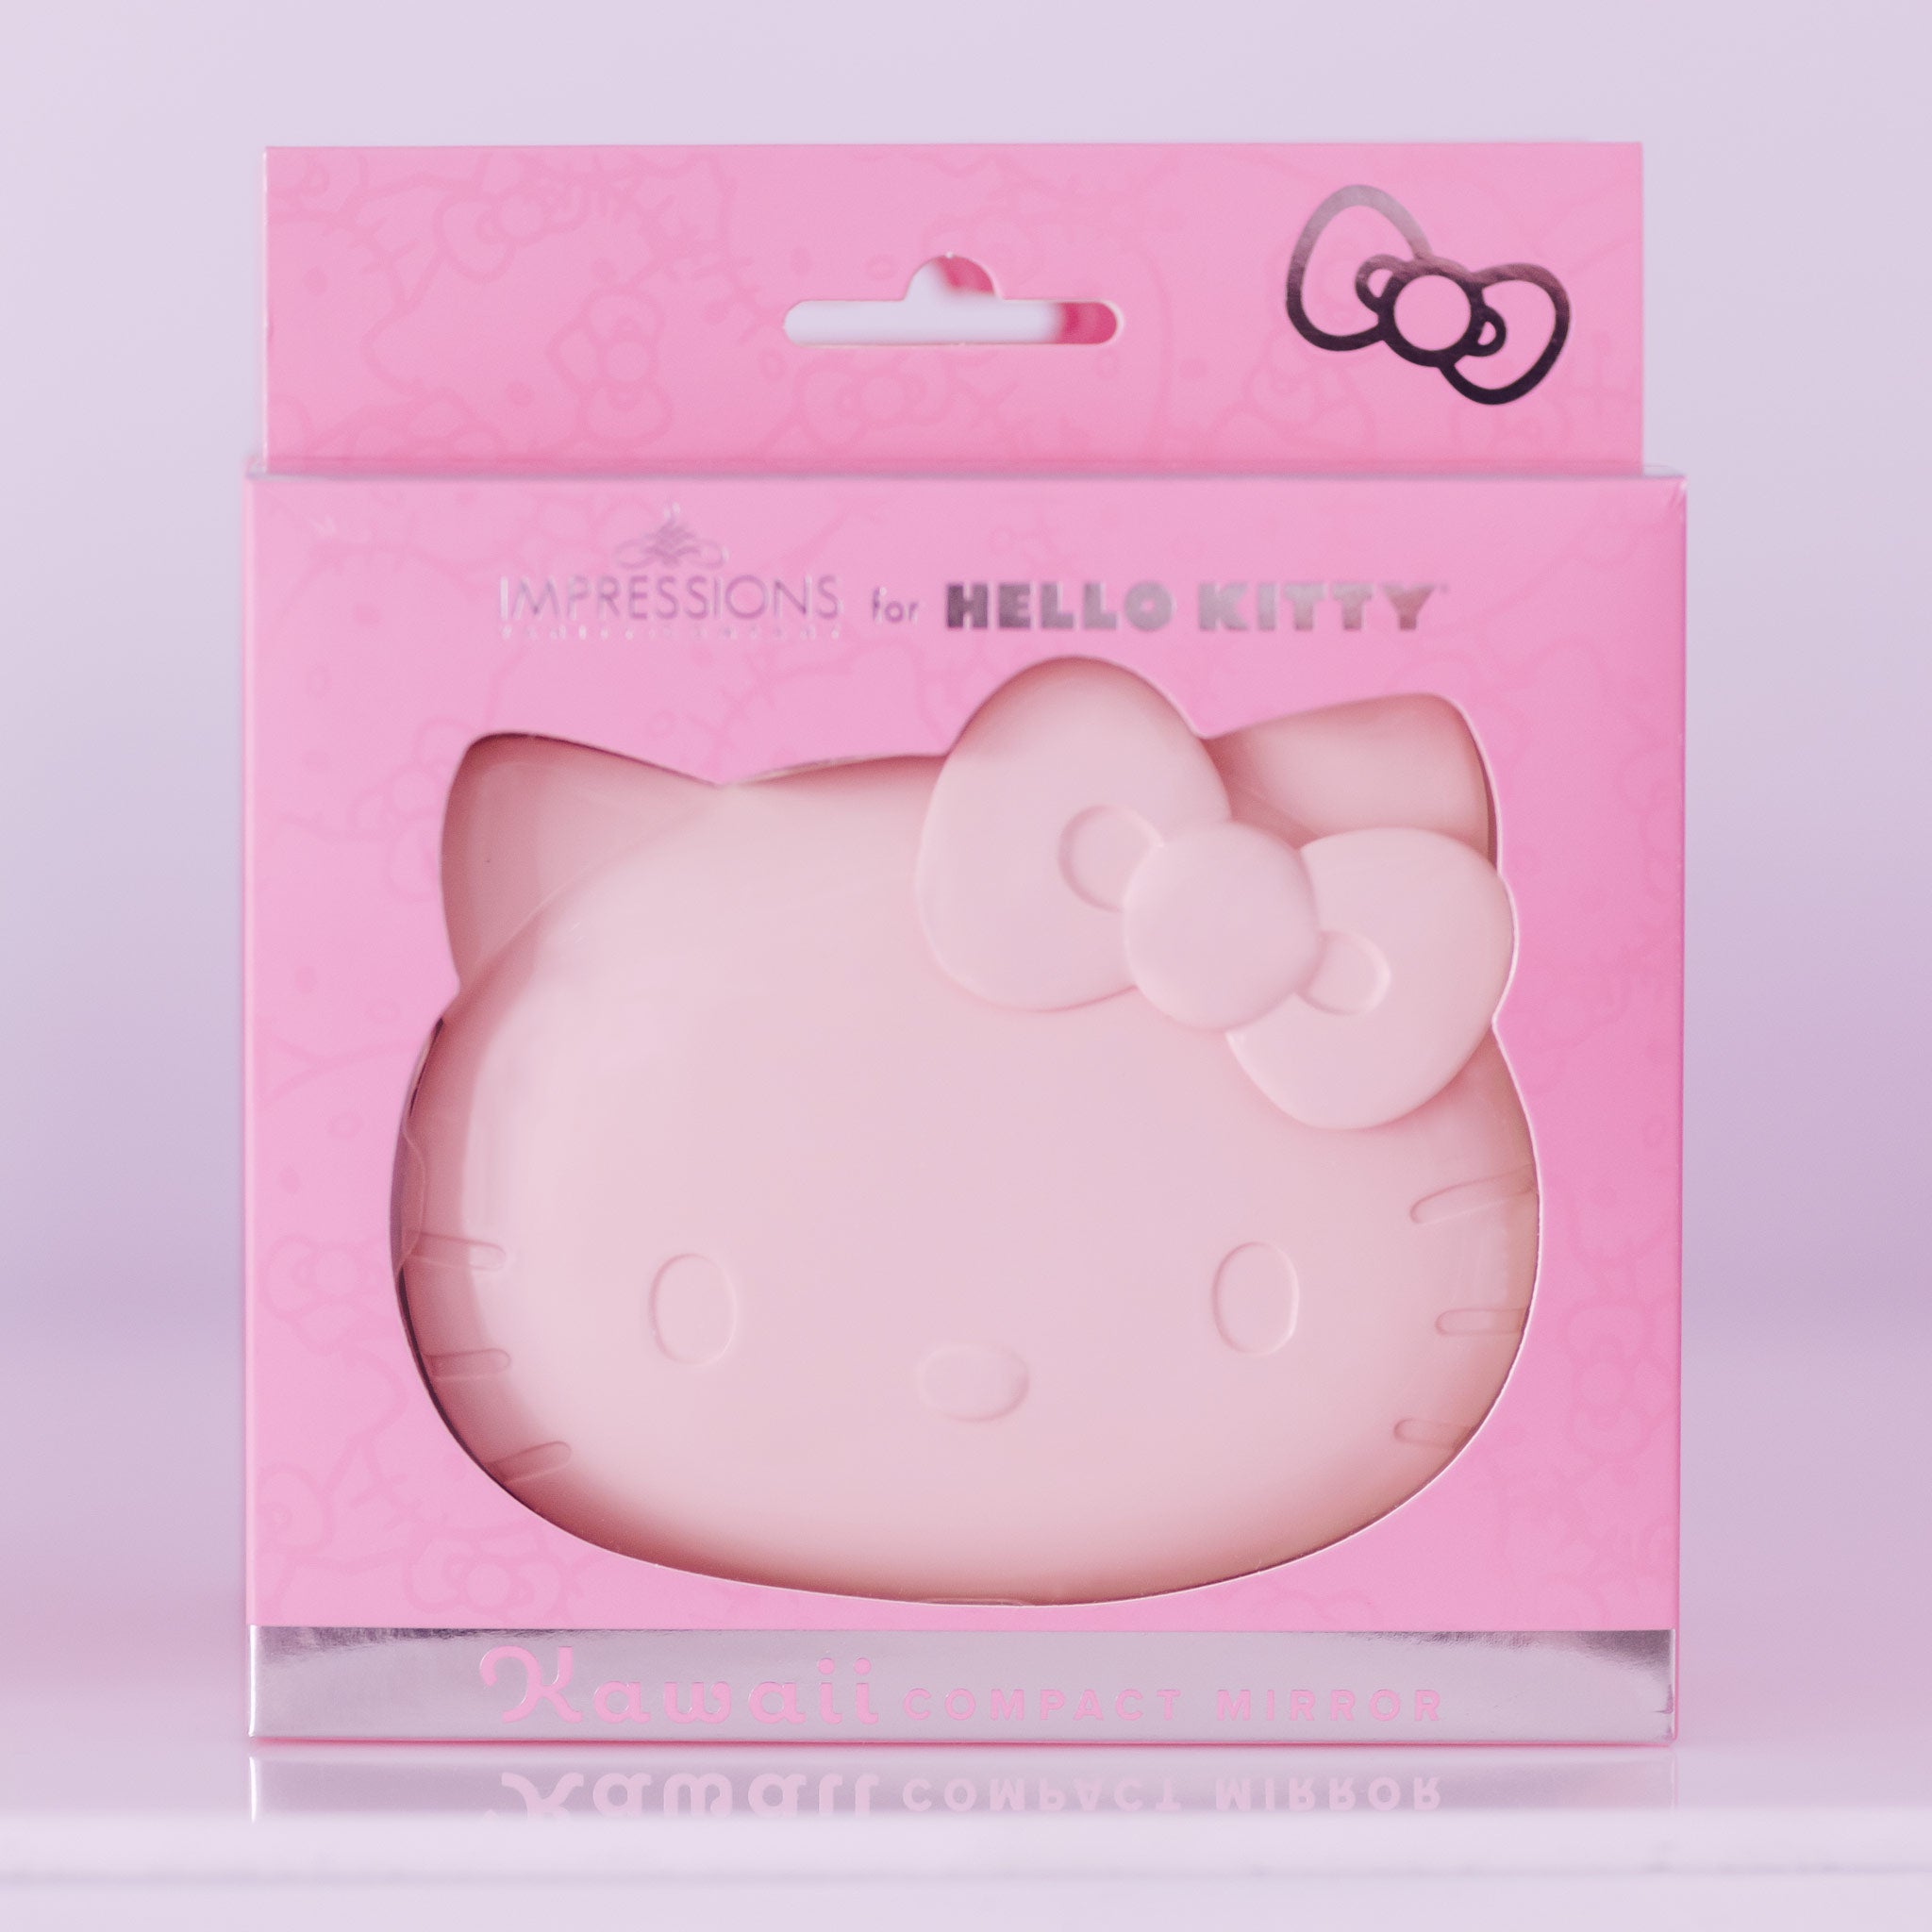 Hello Kitty for Impressions Vanity Compact Mirror